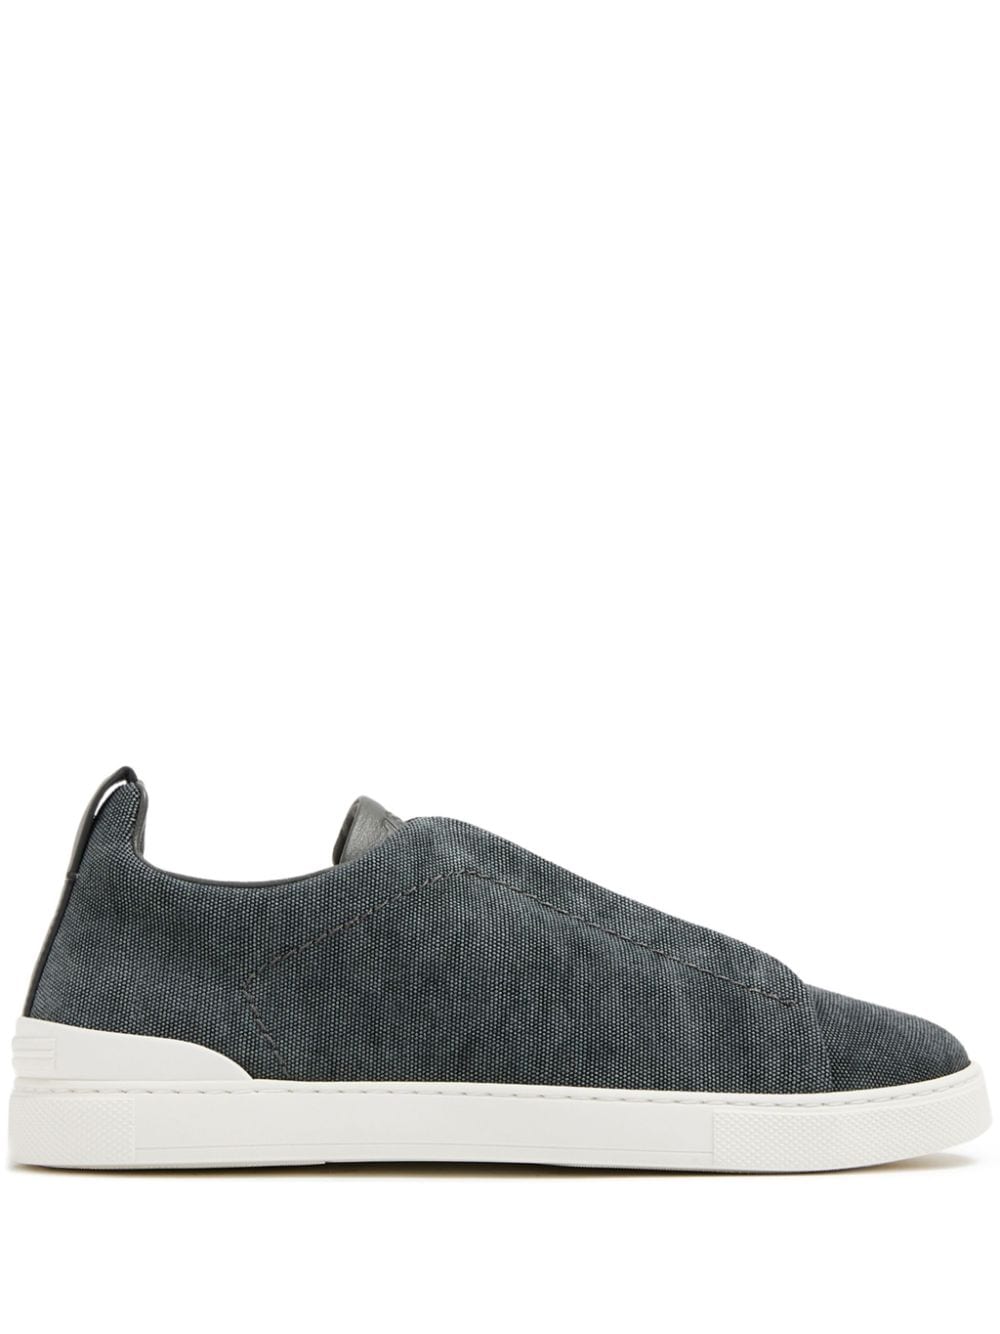 Zegna Triple Stitch Canvas Sneakers In Navy